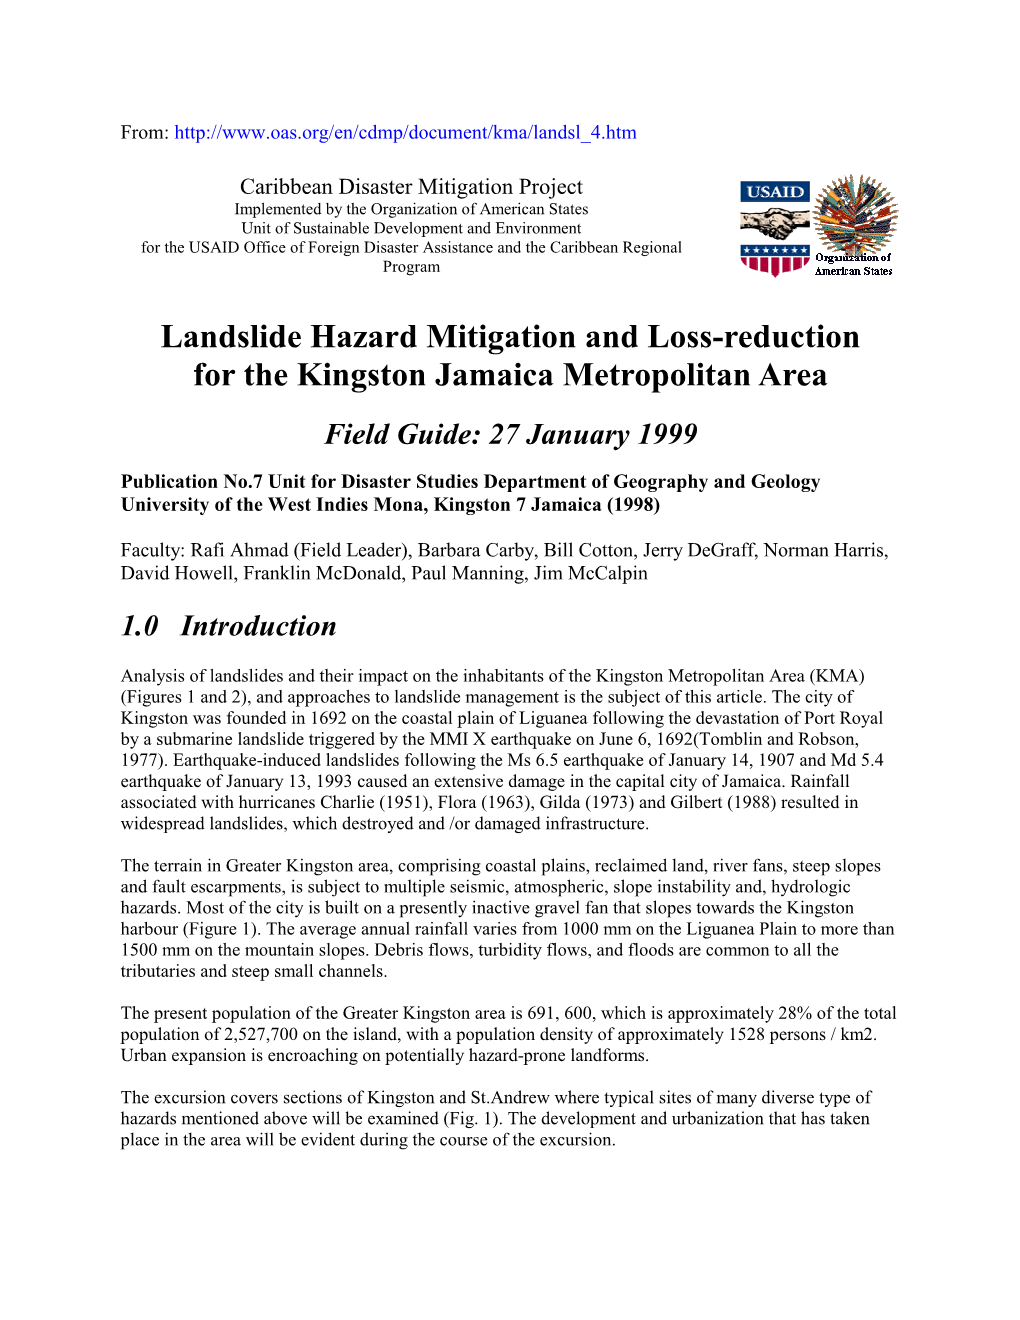 Landslide Hazard Mitigation and Loss-Reduction for the Kingston Jamaica Metropolitan Area Field Guide: 27 January 1999